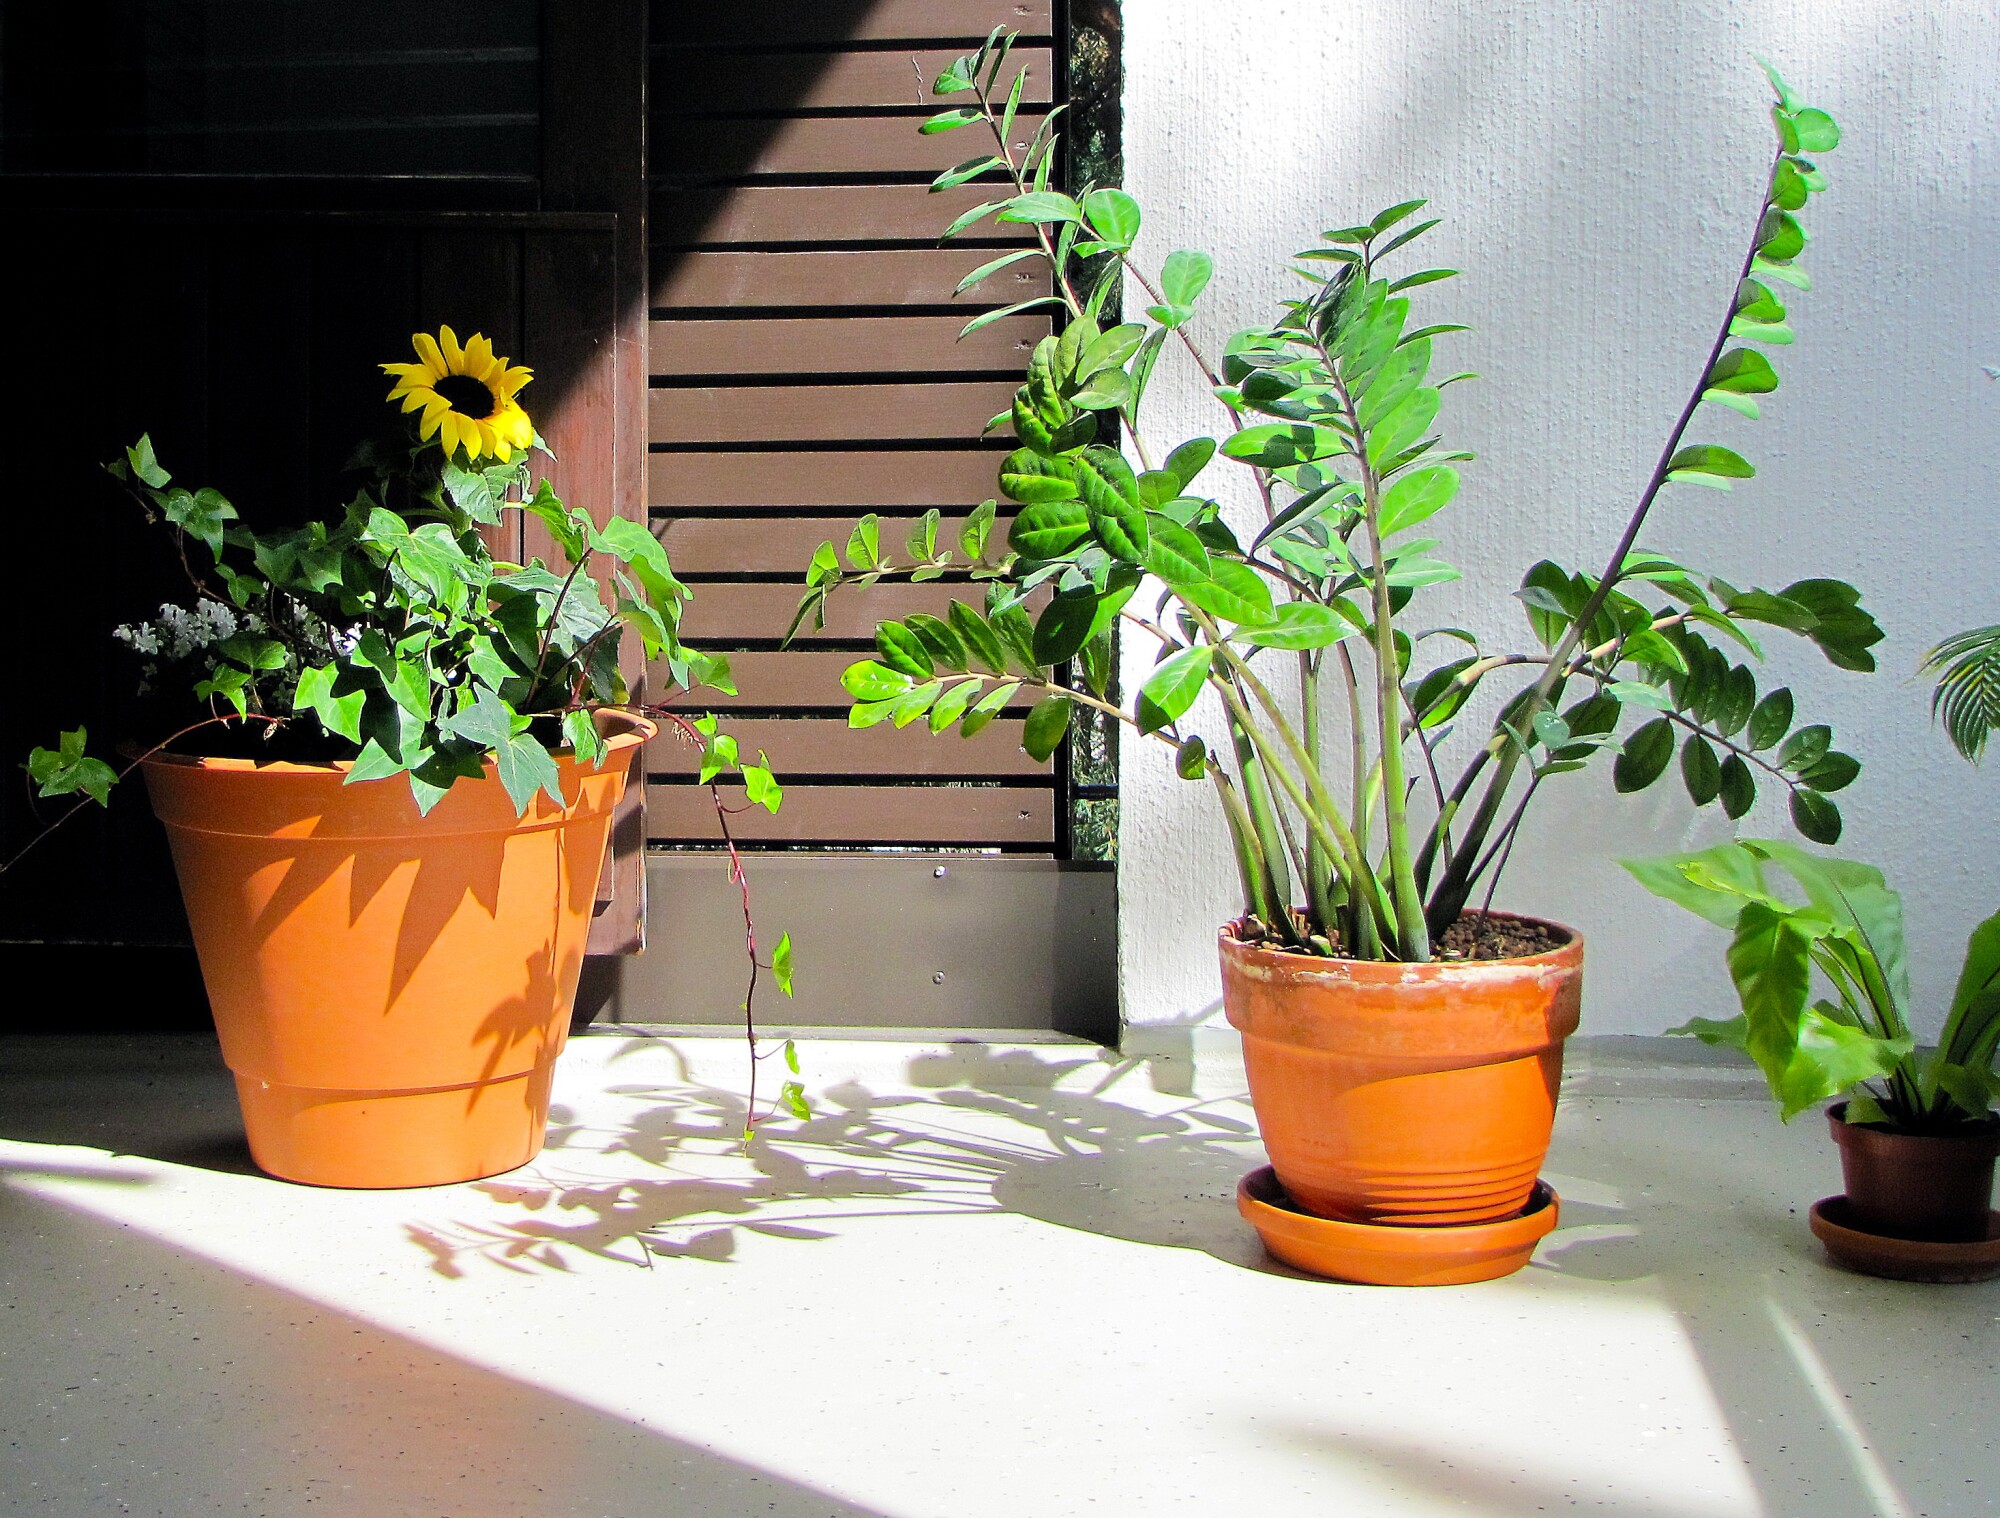 Are you wondering how to keep your beloved plants in great shape? Click here for five common plant care mistakes and how you can avoid them.